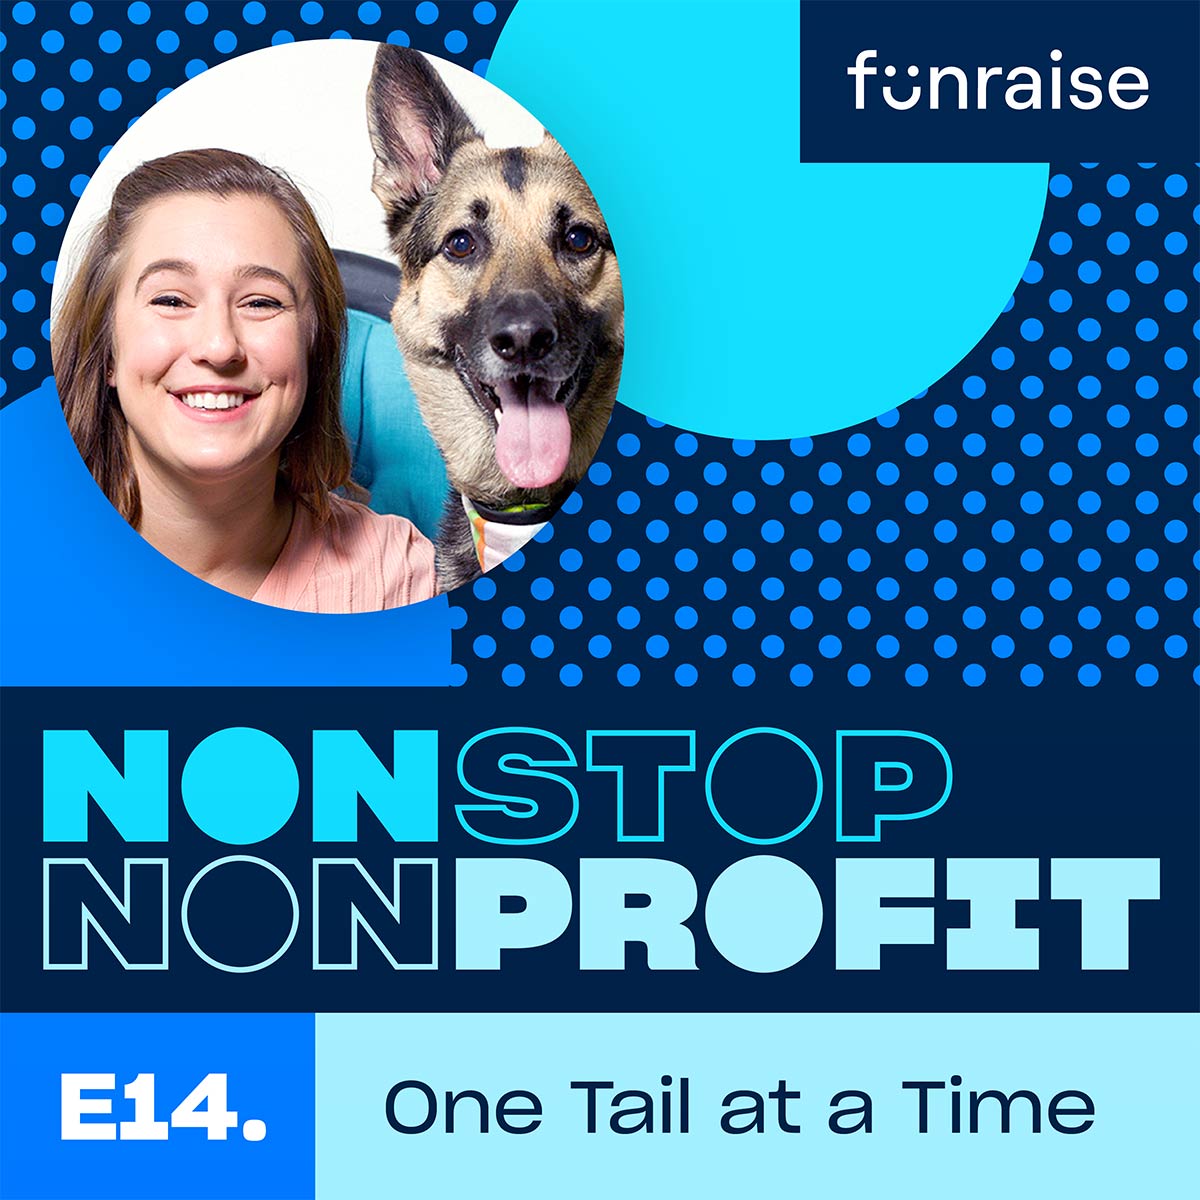 Nonstop Nonprofit Episode 14, One Tail at a Time